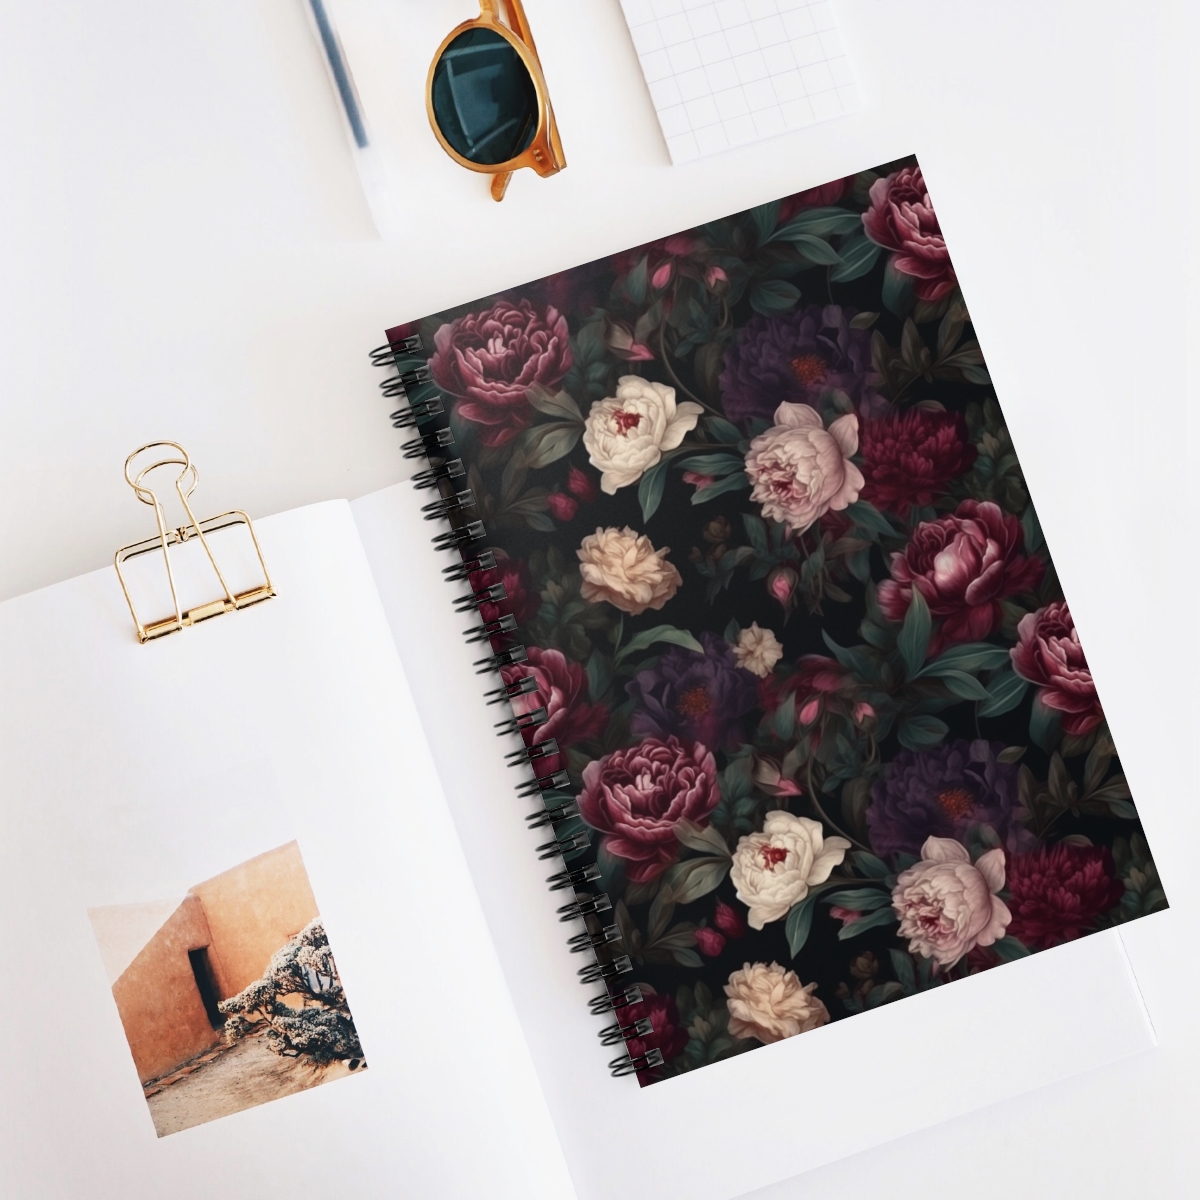 Queen of Ash and Shadow's Rose Garden Spiral Notebook - Ruled Line product main image